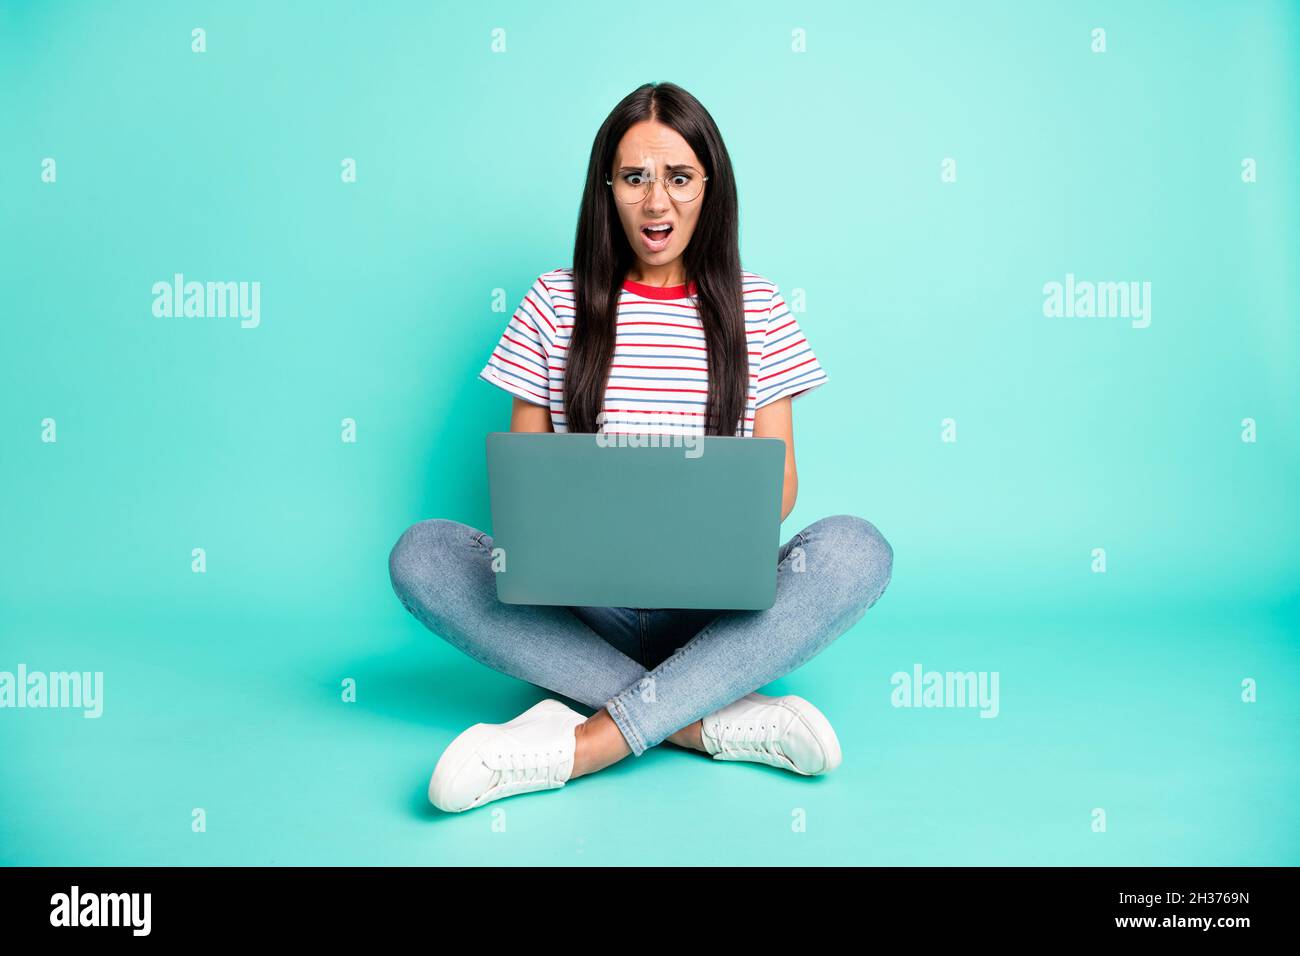 Full size photo of impressed displeased girl sit on floor use laptop open mouth isolated on teal color background Stock Photo